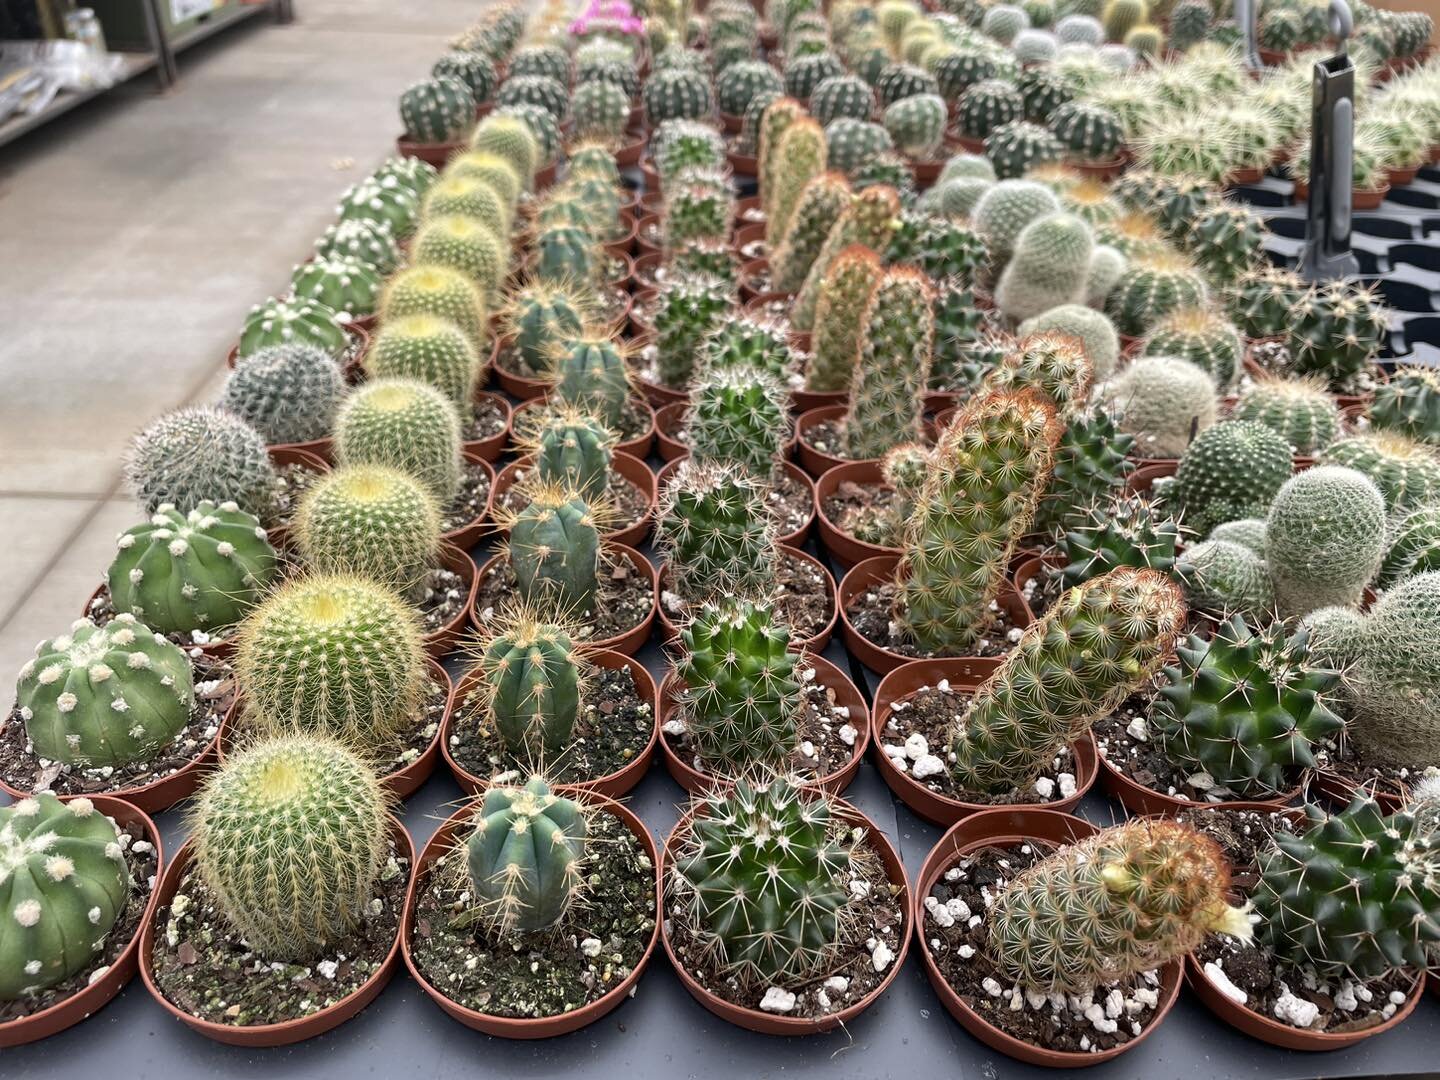 🪴Terrarium artists rejoice! Our largest restock of small two inch plants, cactus, and succulents just arrived and they look great. 

🛒Use these tiny plants for succulent containers, tiny plants on tiny pots, and for terrariums. Stop in today and ge